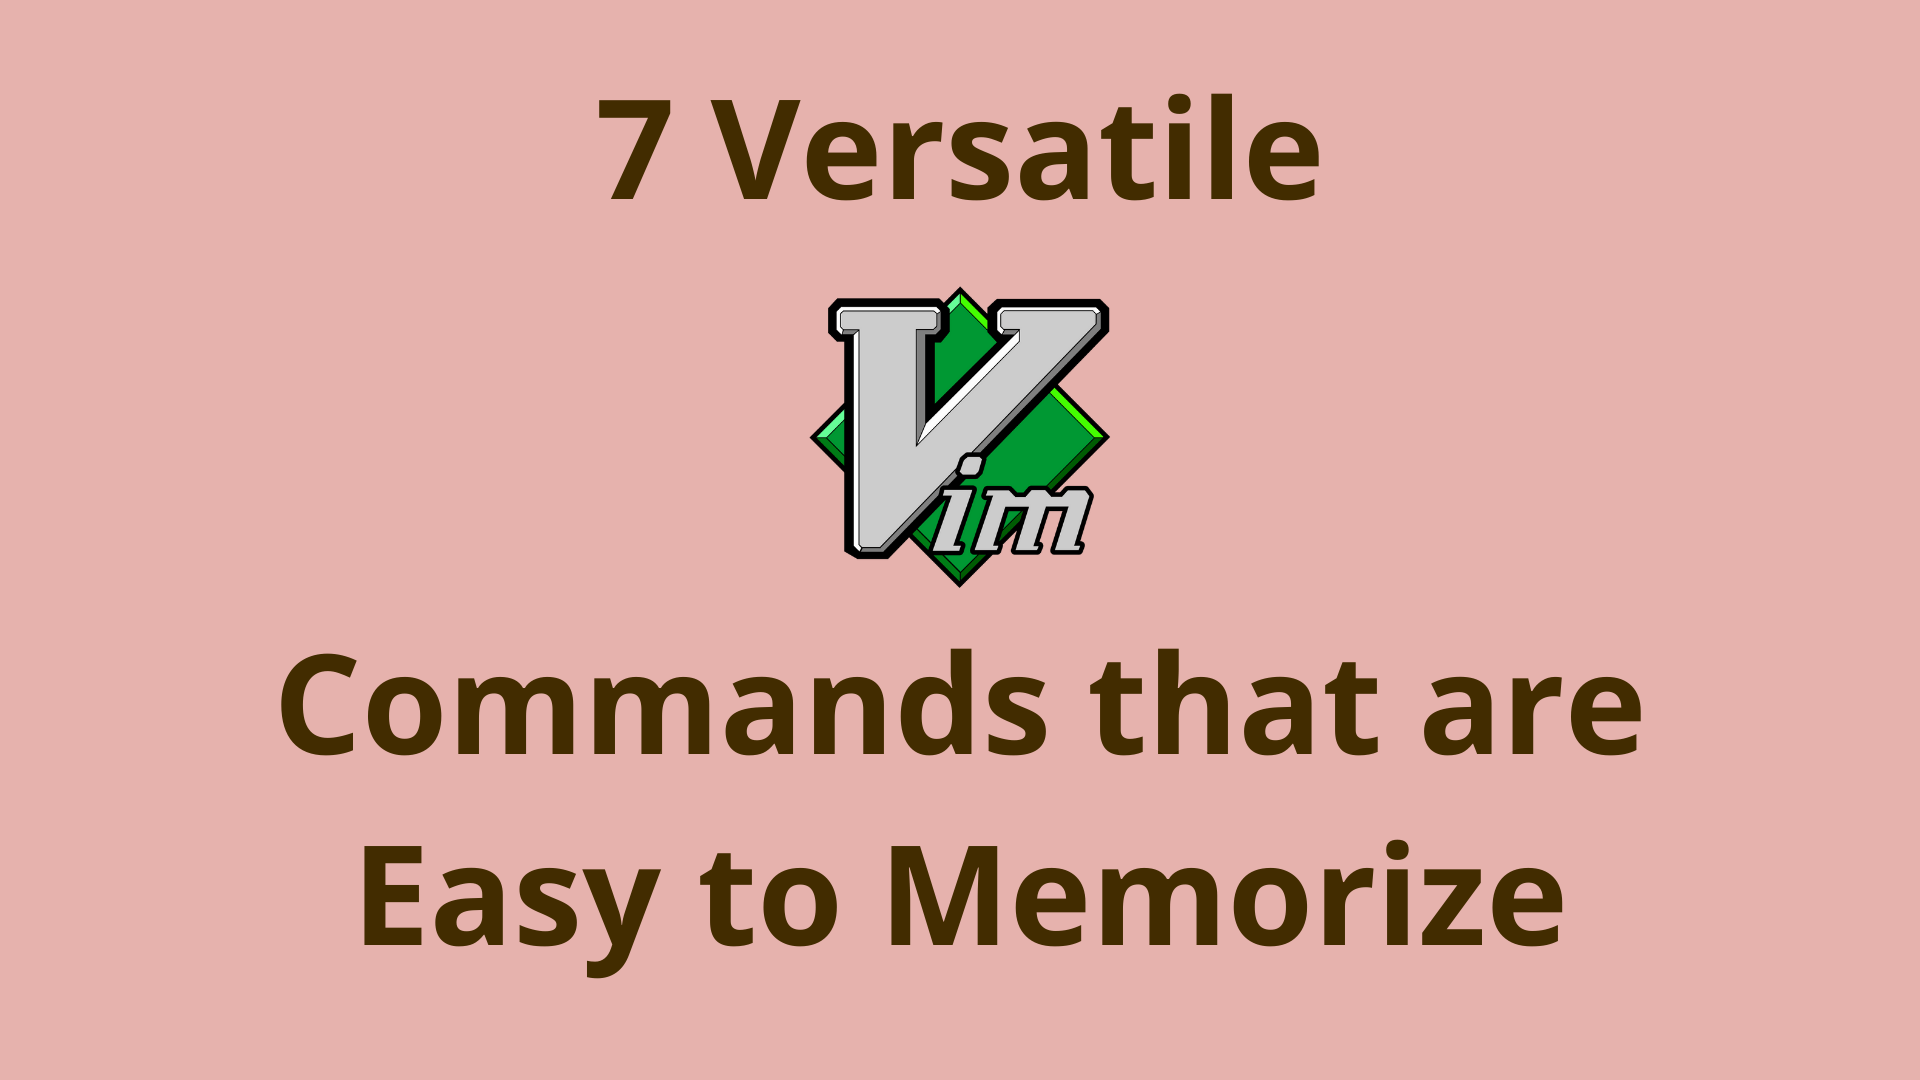 Image of 7 versatile Vim commands that are easy to memorize